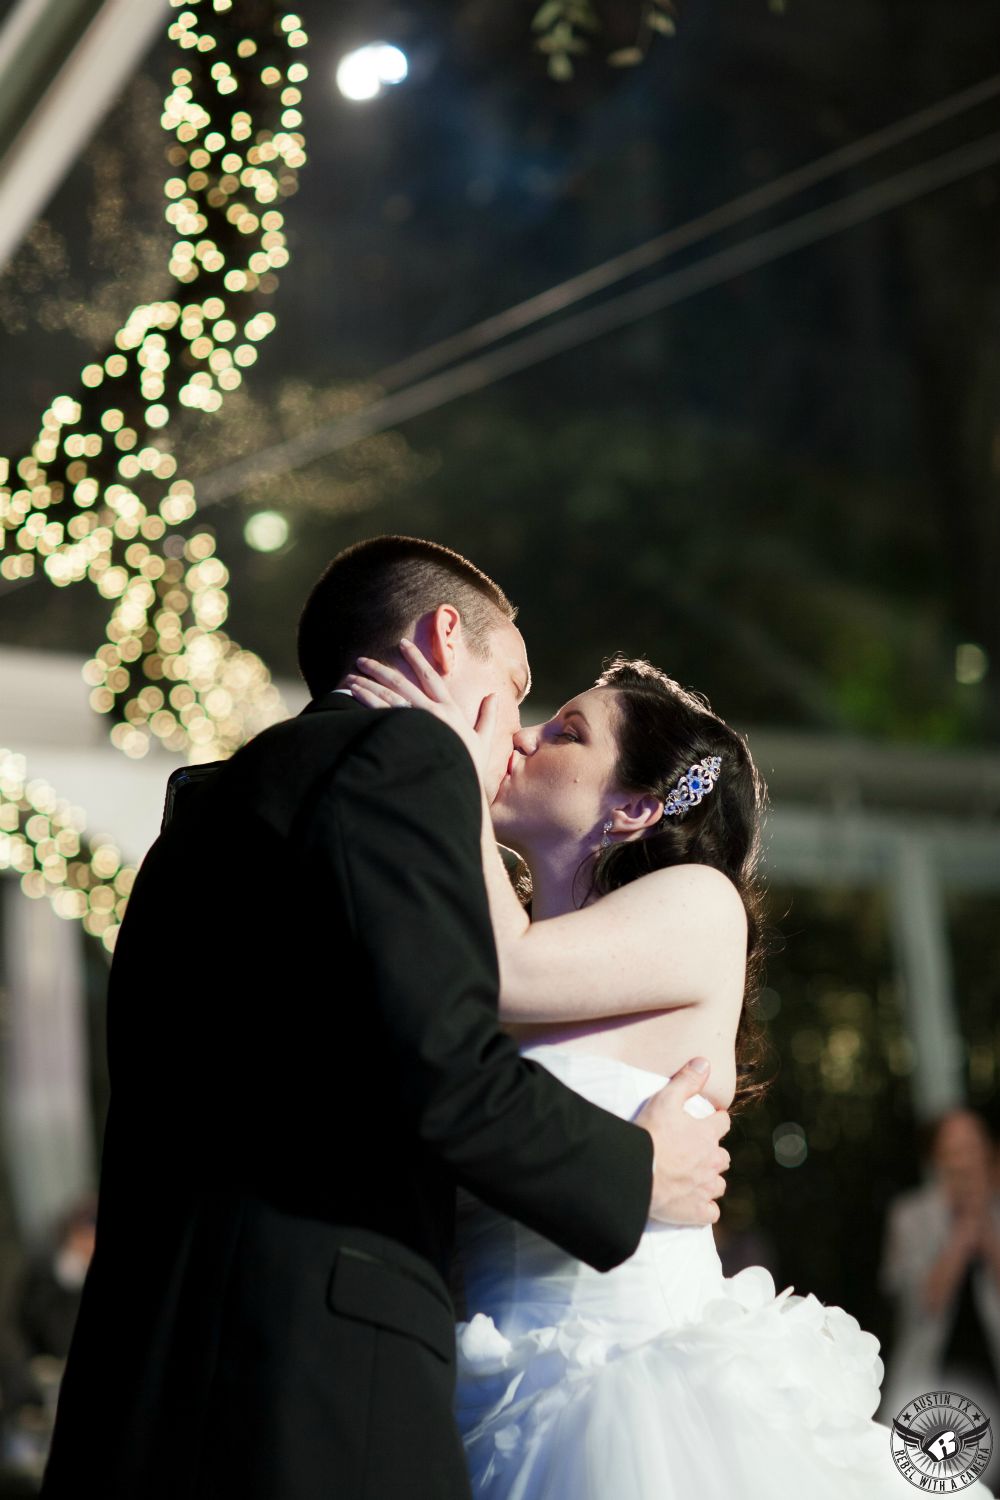 Dramatic image of bride and groom kissing on their wedding day during their first dance at their wedding reception at the Allan House Austin wedding venue by Austin wedding photographer.